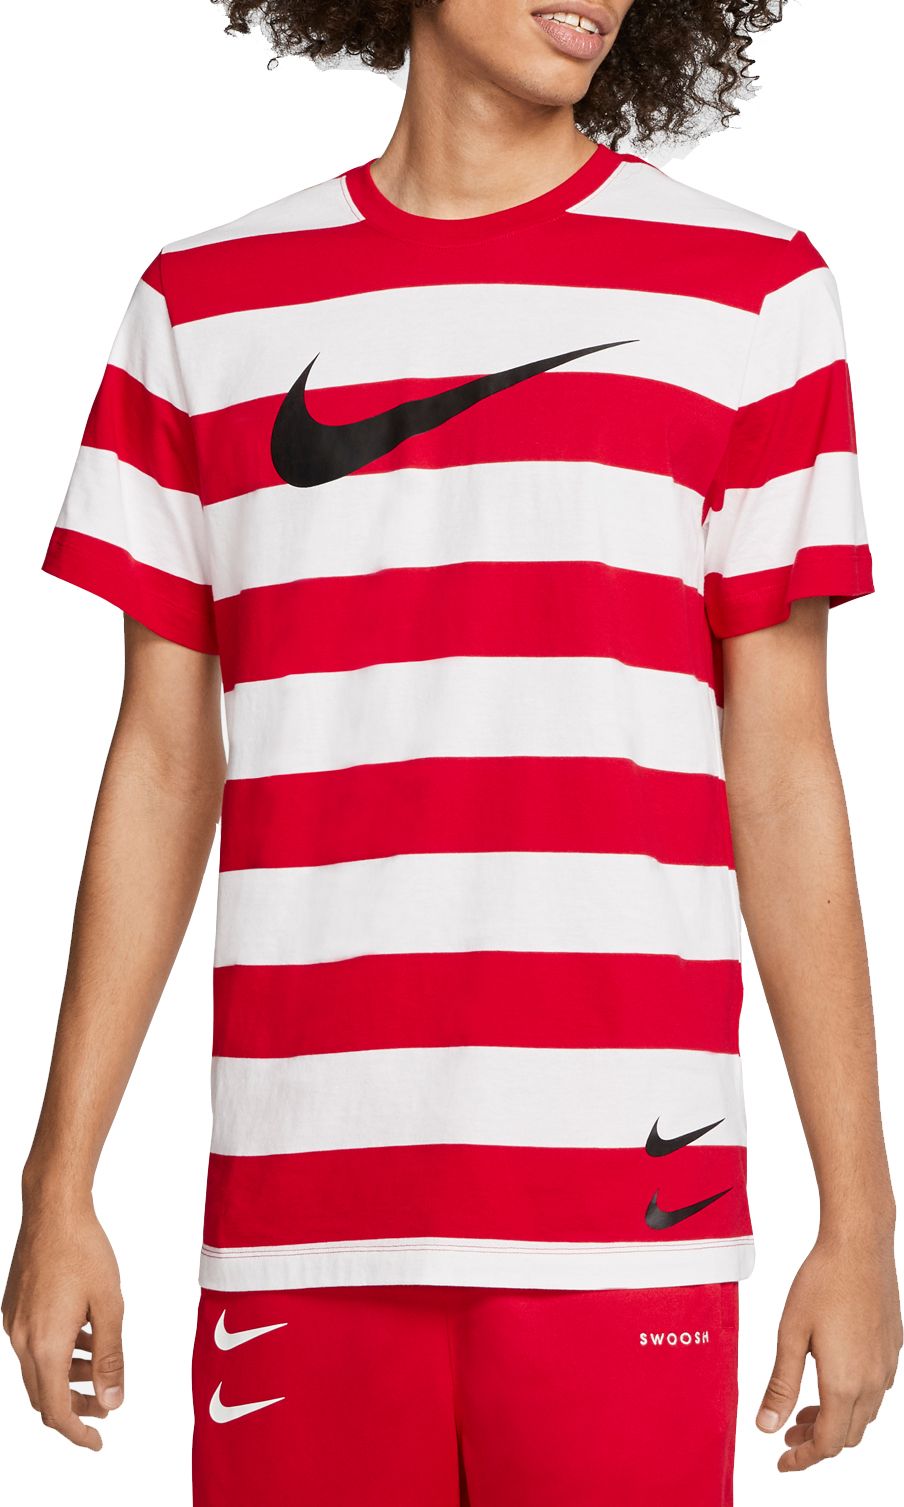 white nike shirt with red swoosh